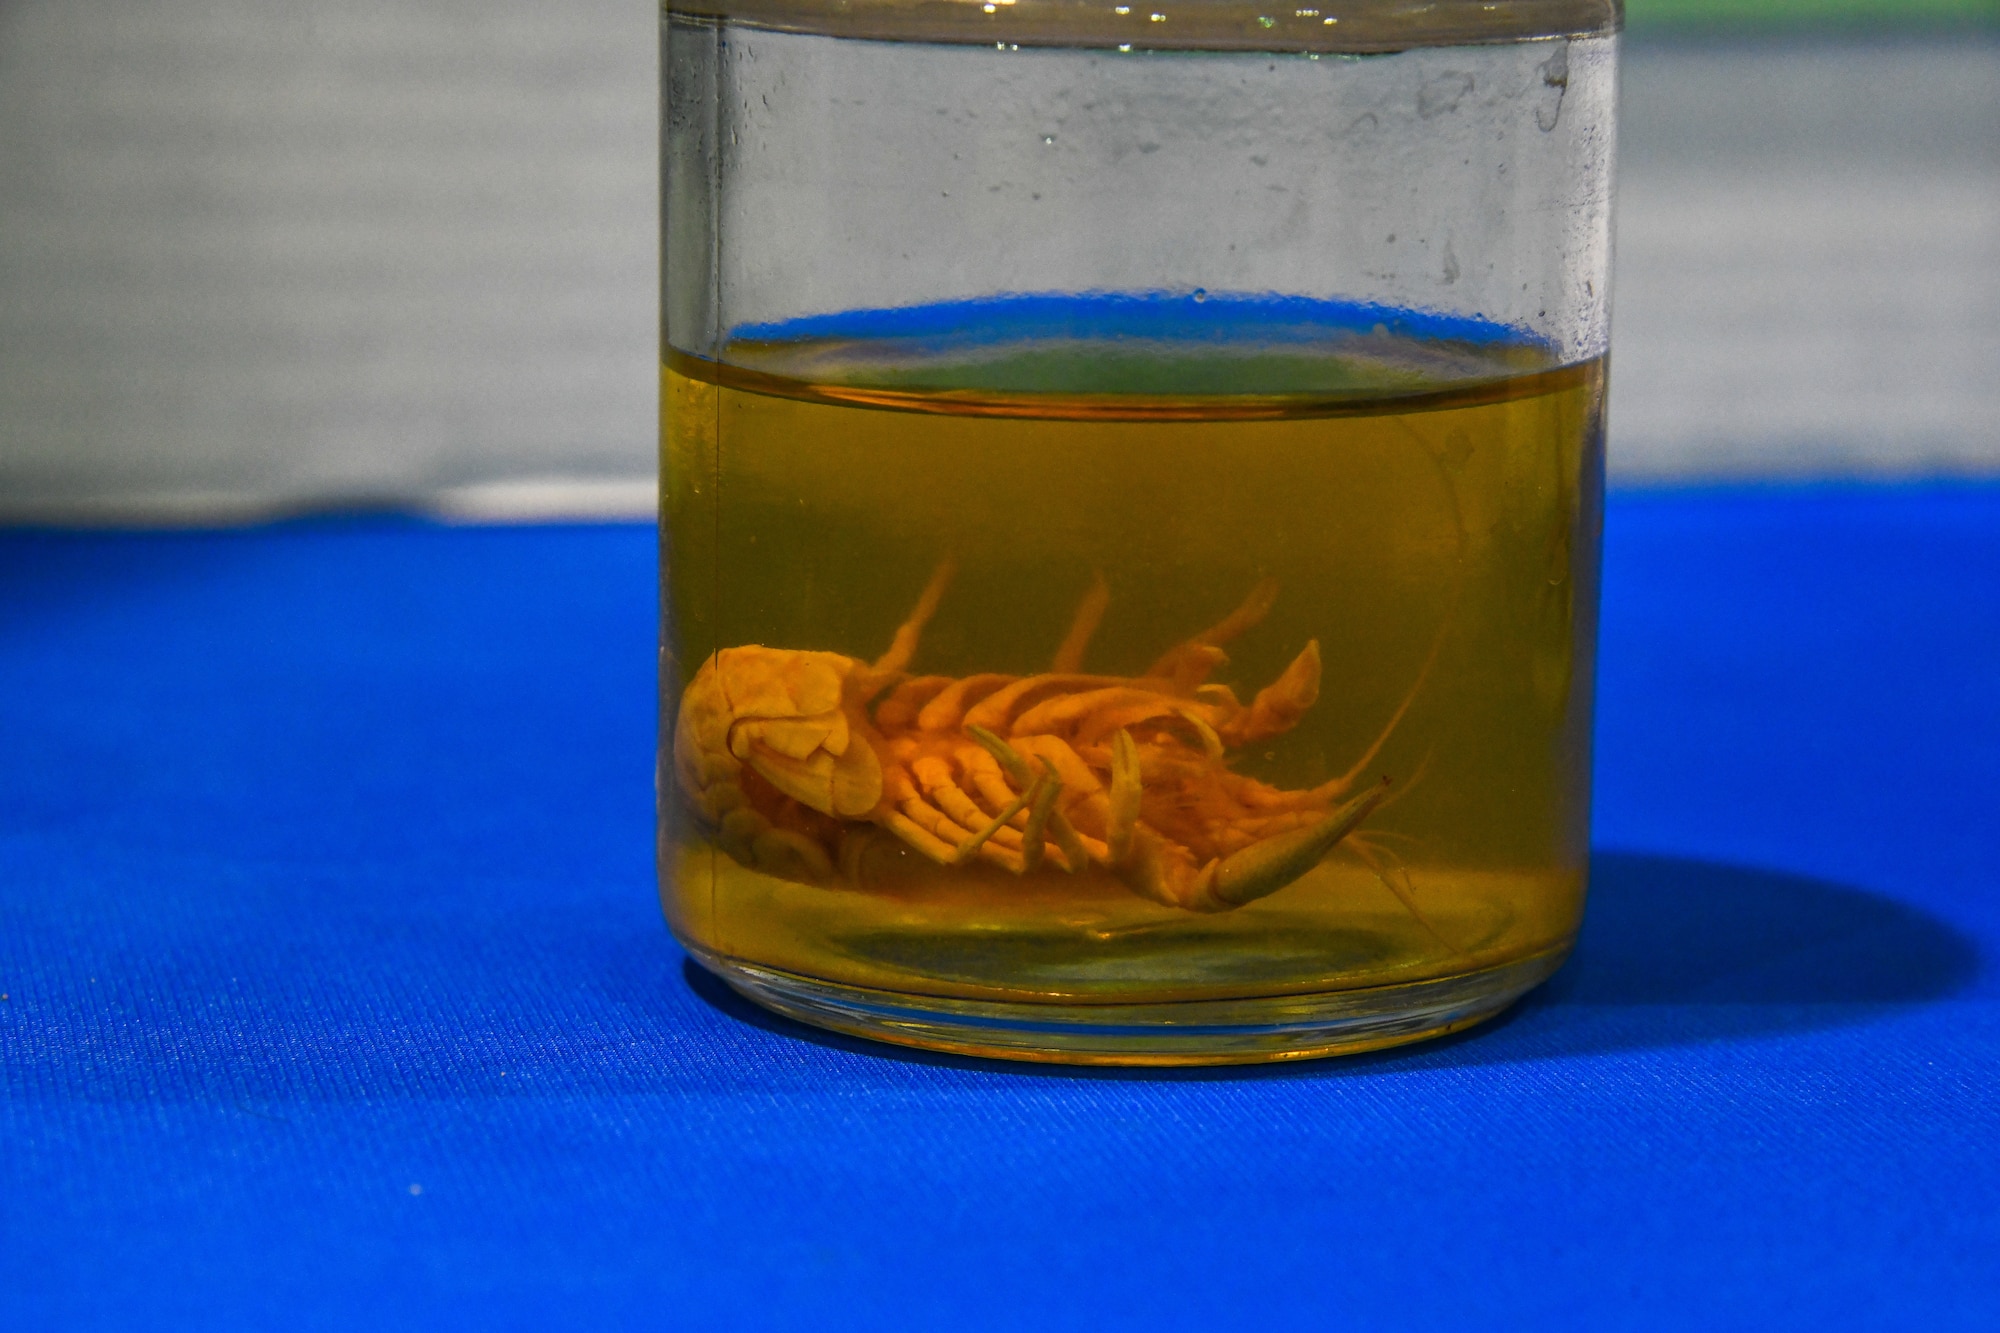 A crawfish is displayed in formalin at a Science, Technology, Engineering and Mathematics (STEM) fair, held at Altus High School, Altus, Oklahoma, March 30, 2022. Crawfish are considered benthic macroinvertebrates, or small aquatic animals with no backbone, which are studied to test water pollution. (U.S. Air Force photo by Airman 1st Class Miyah Gray)